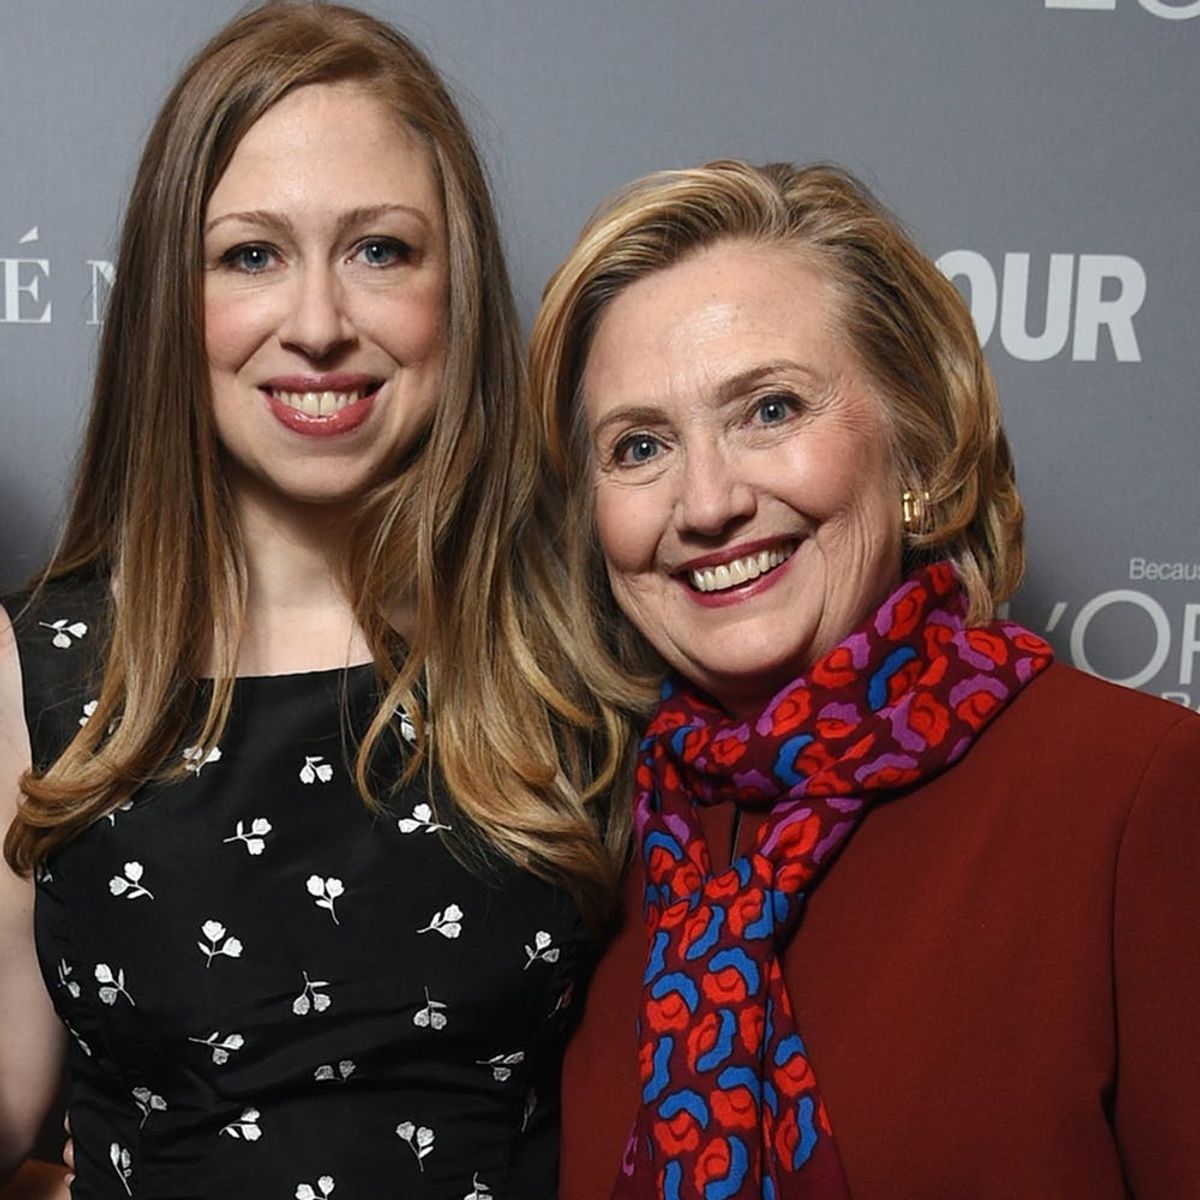 Chelsea Clinton Might Soon Be Following in Her Mother’s Political Footsteps